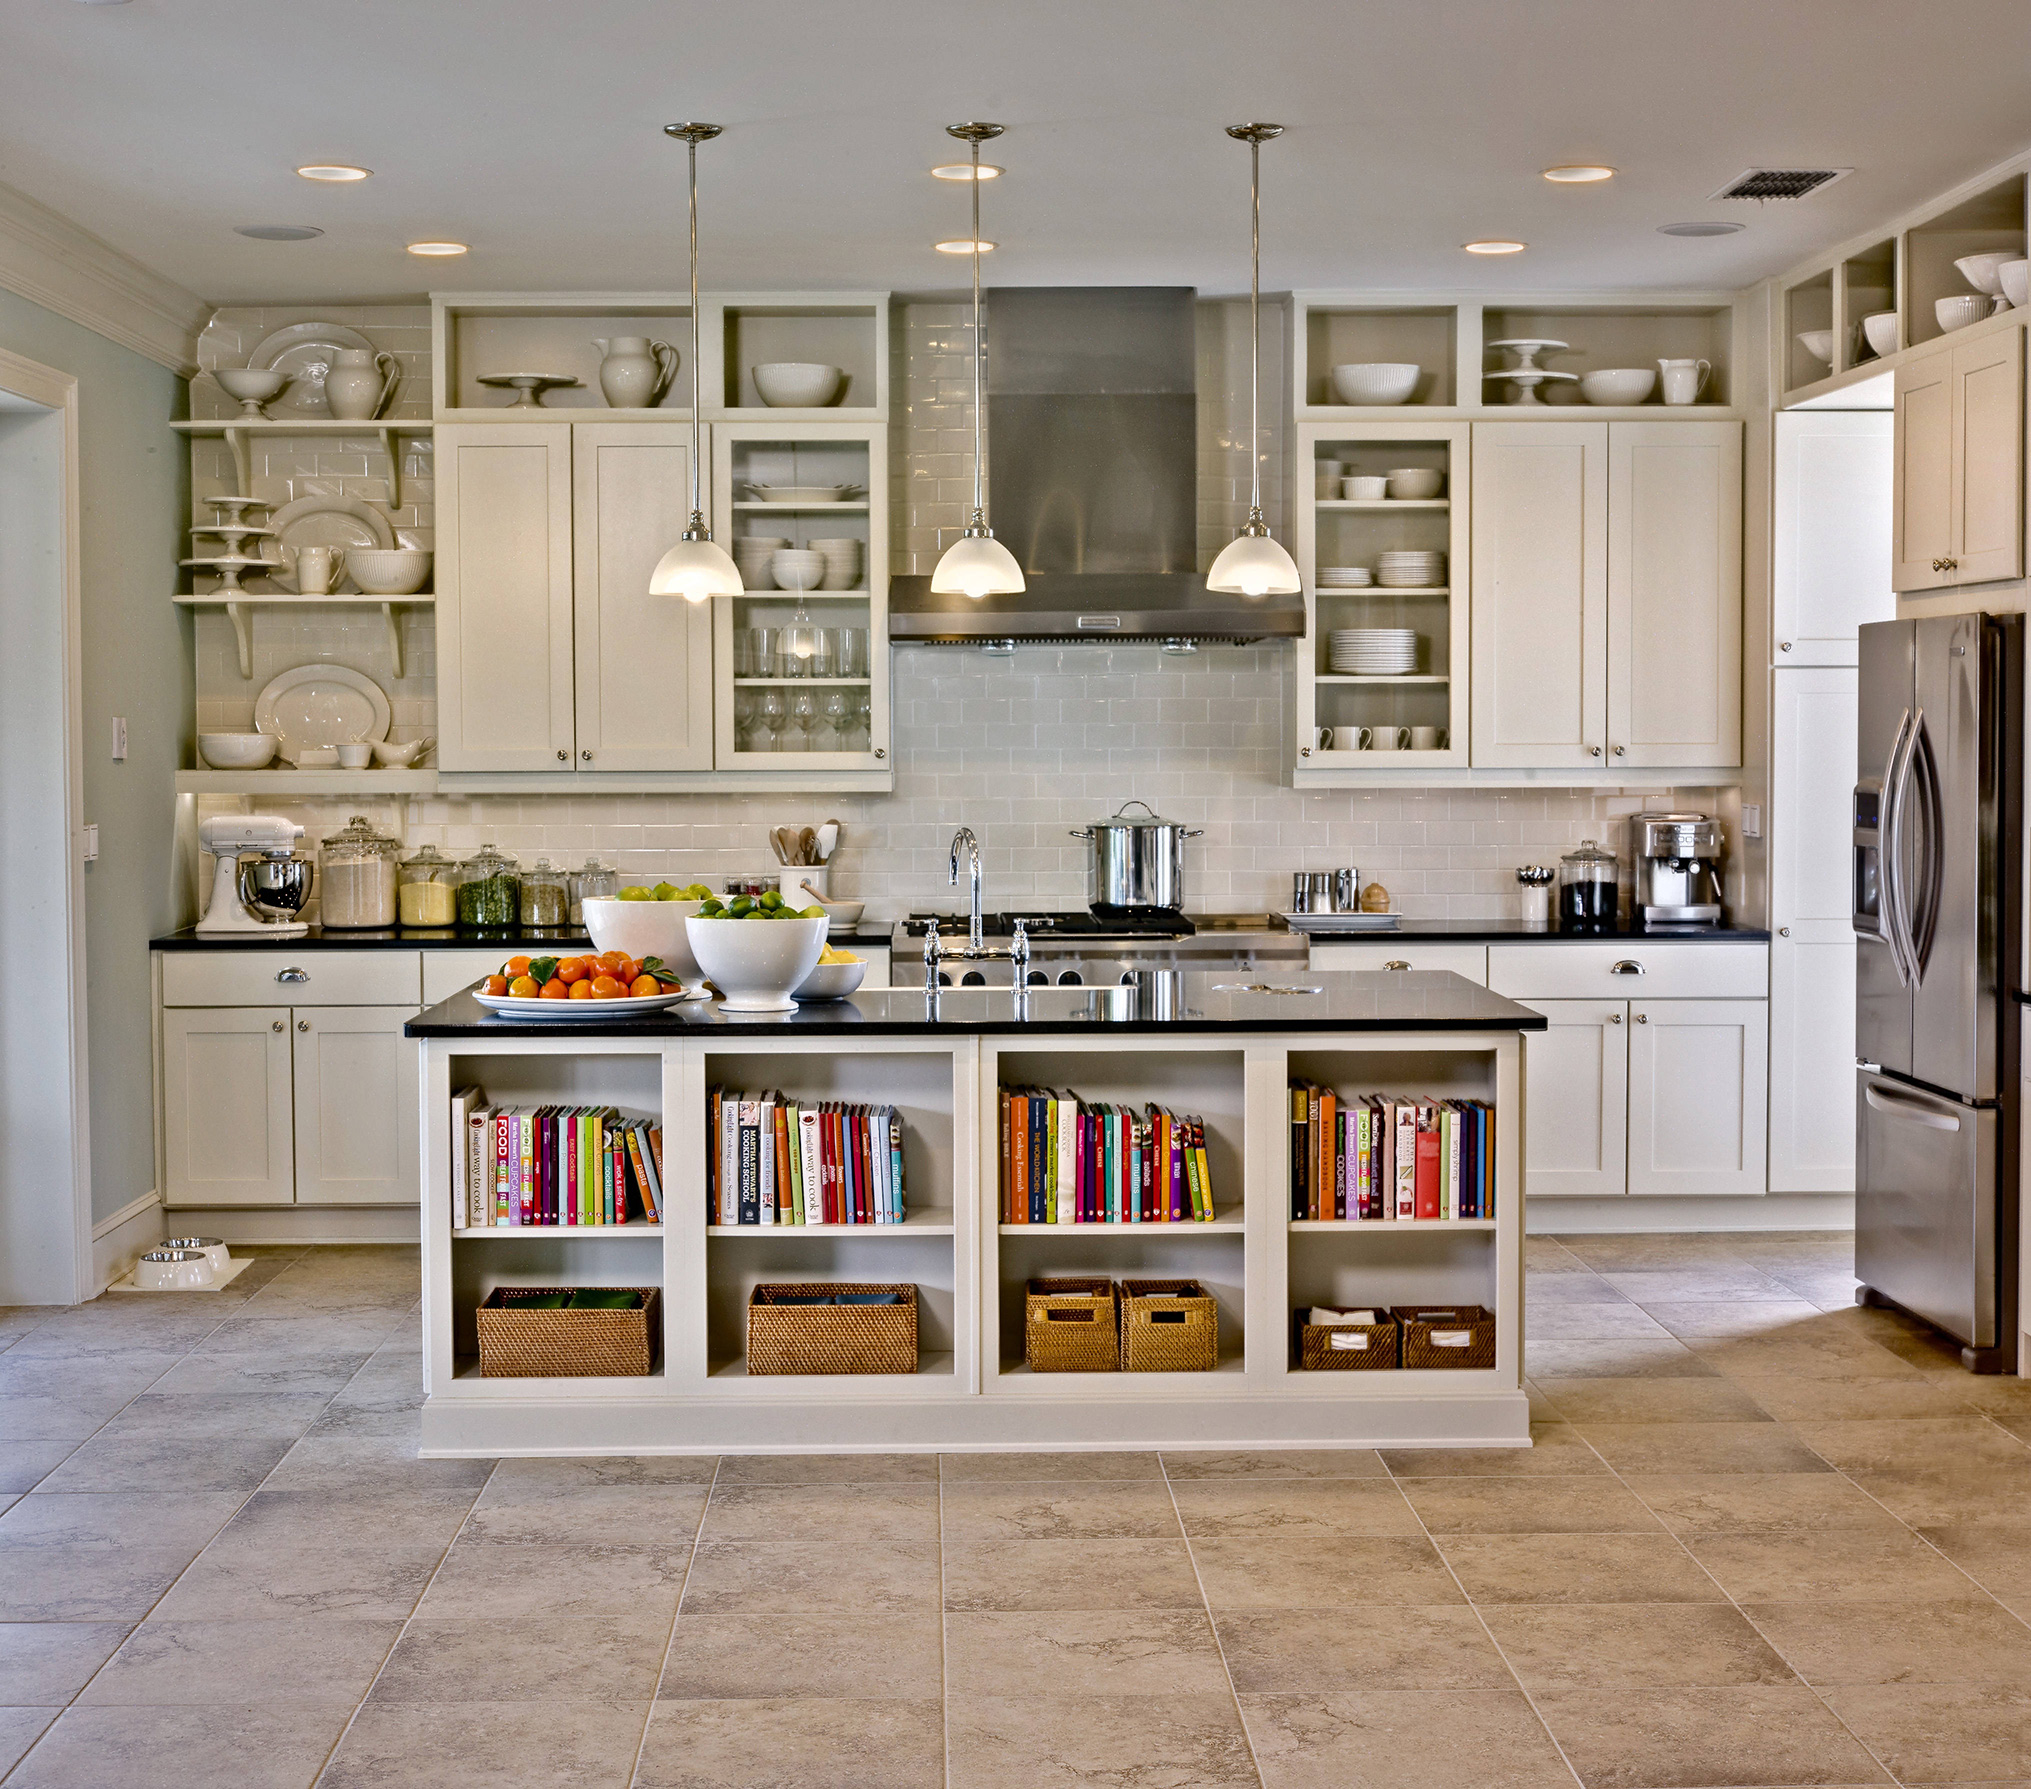 5 Common Kitchen Design Myths To Forget In 2015